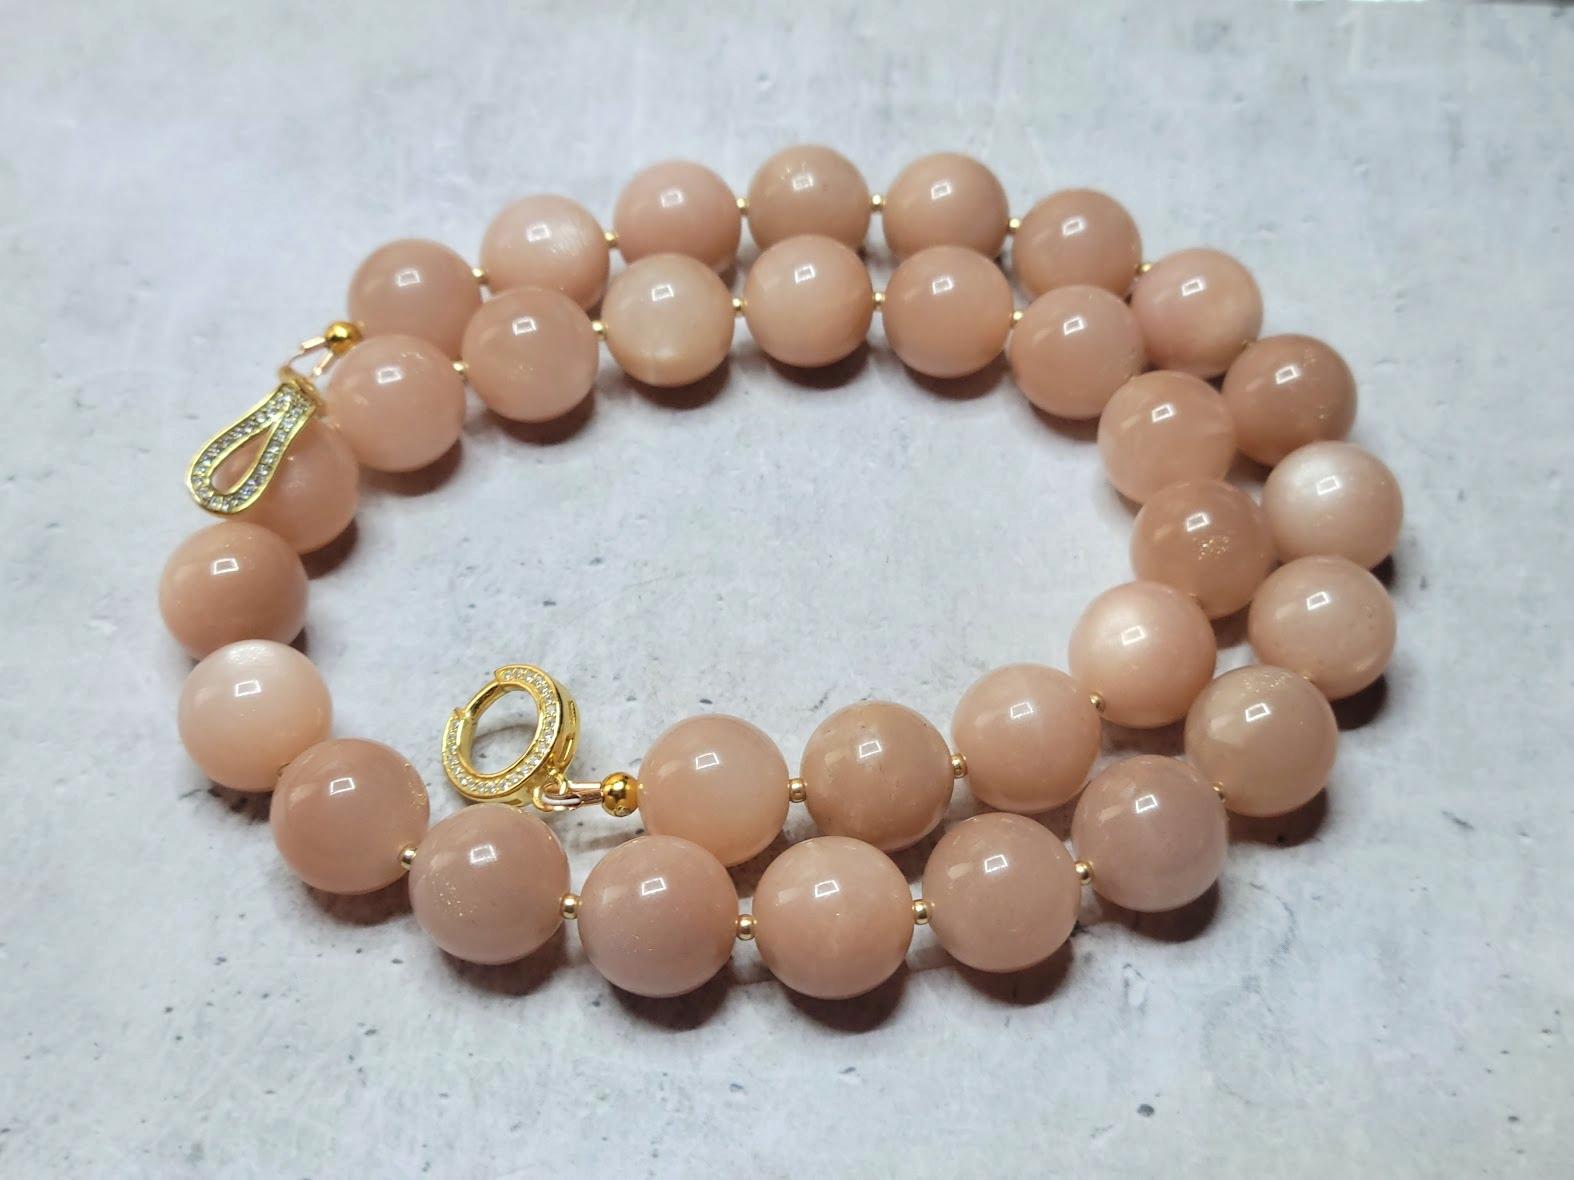 The length of the necklace is 18 inches (45.7 cm). The size of the smooth round beads is 12 mm. The moonstone beads are high-quality AAA. Peach Moonstone is mined in the Himalayas.
Beads have a delightfully soft, gentle, uniform peach tone with an